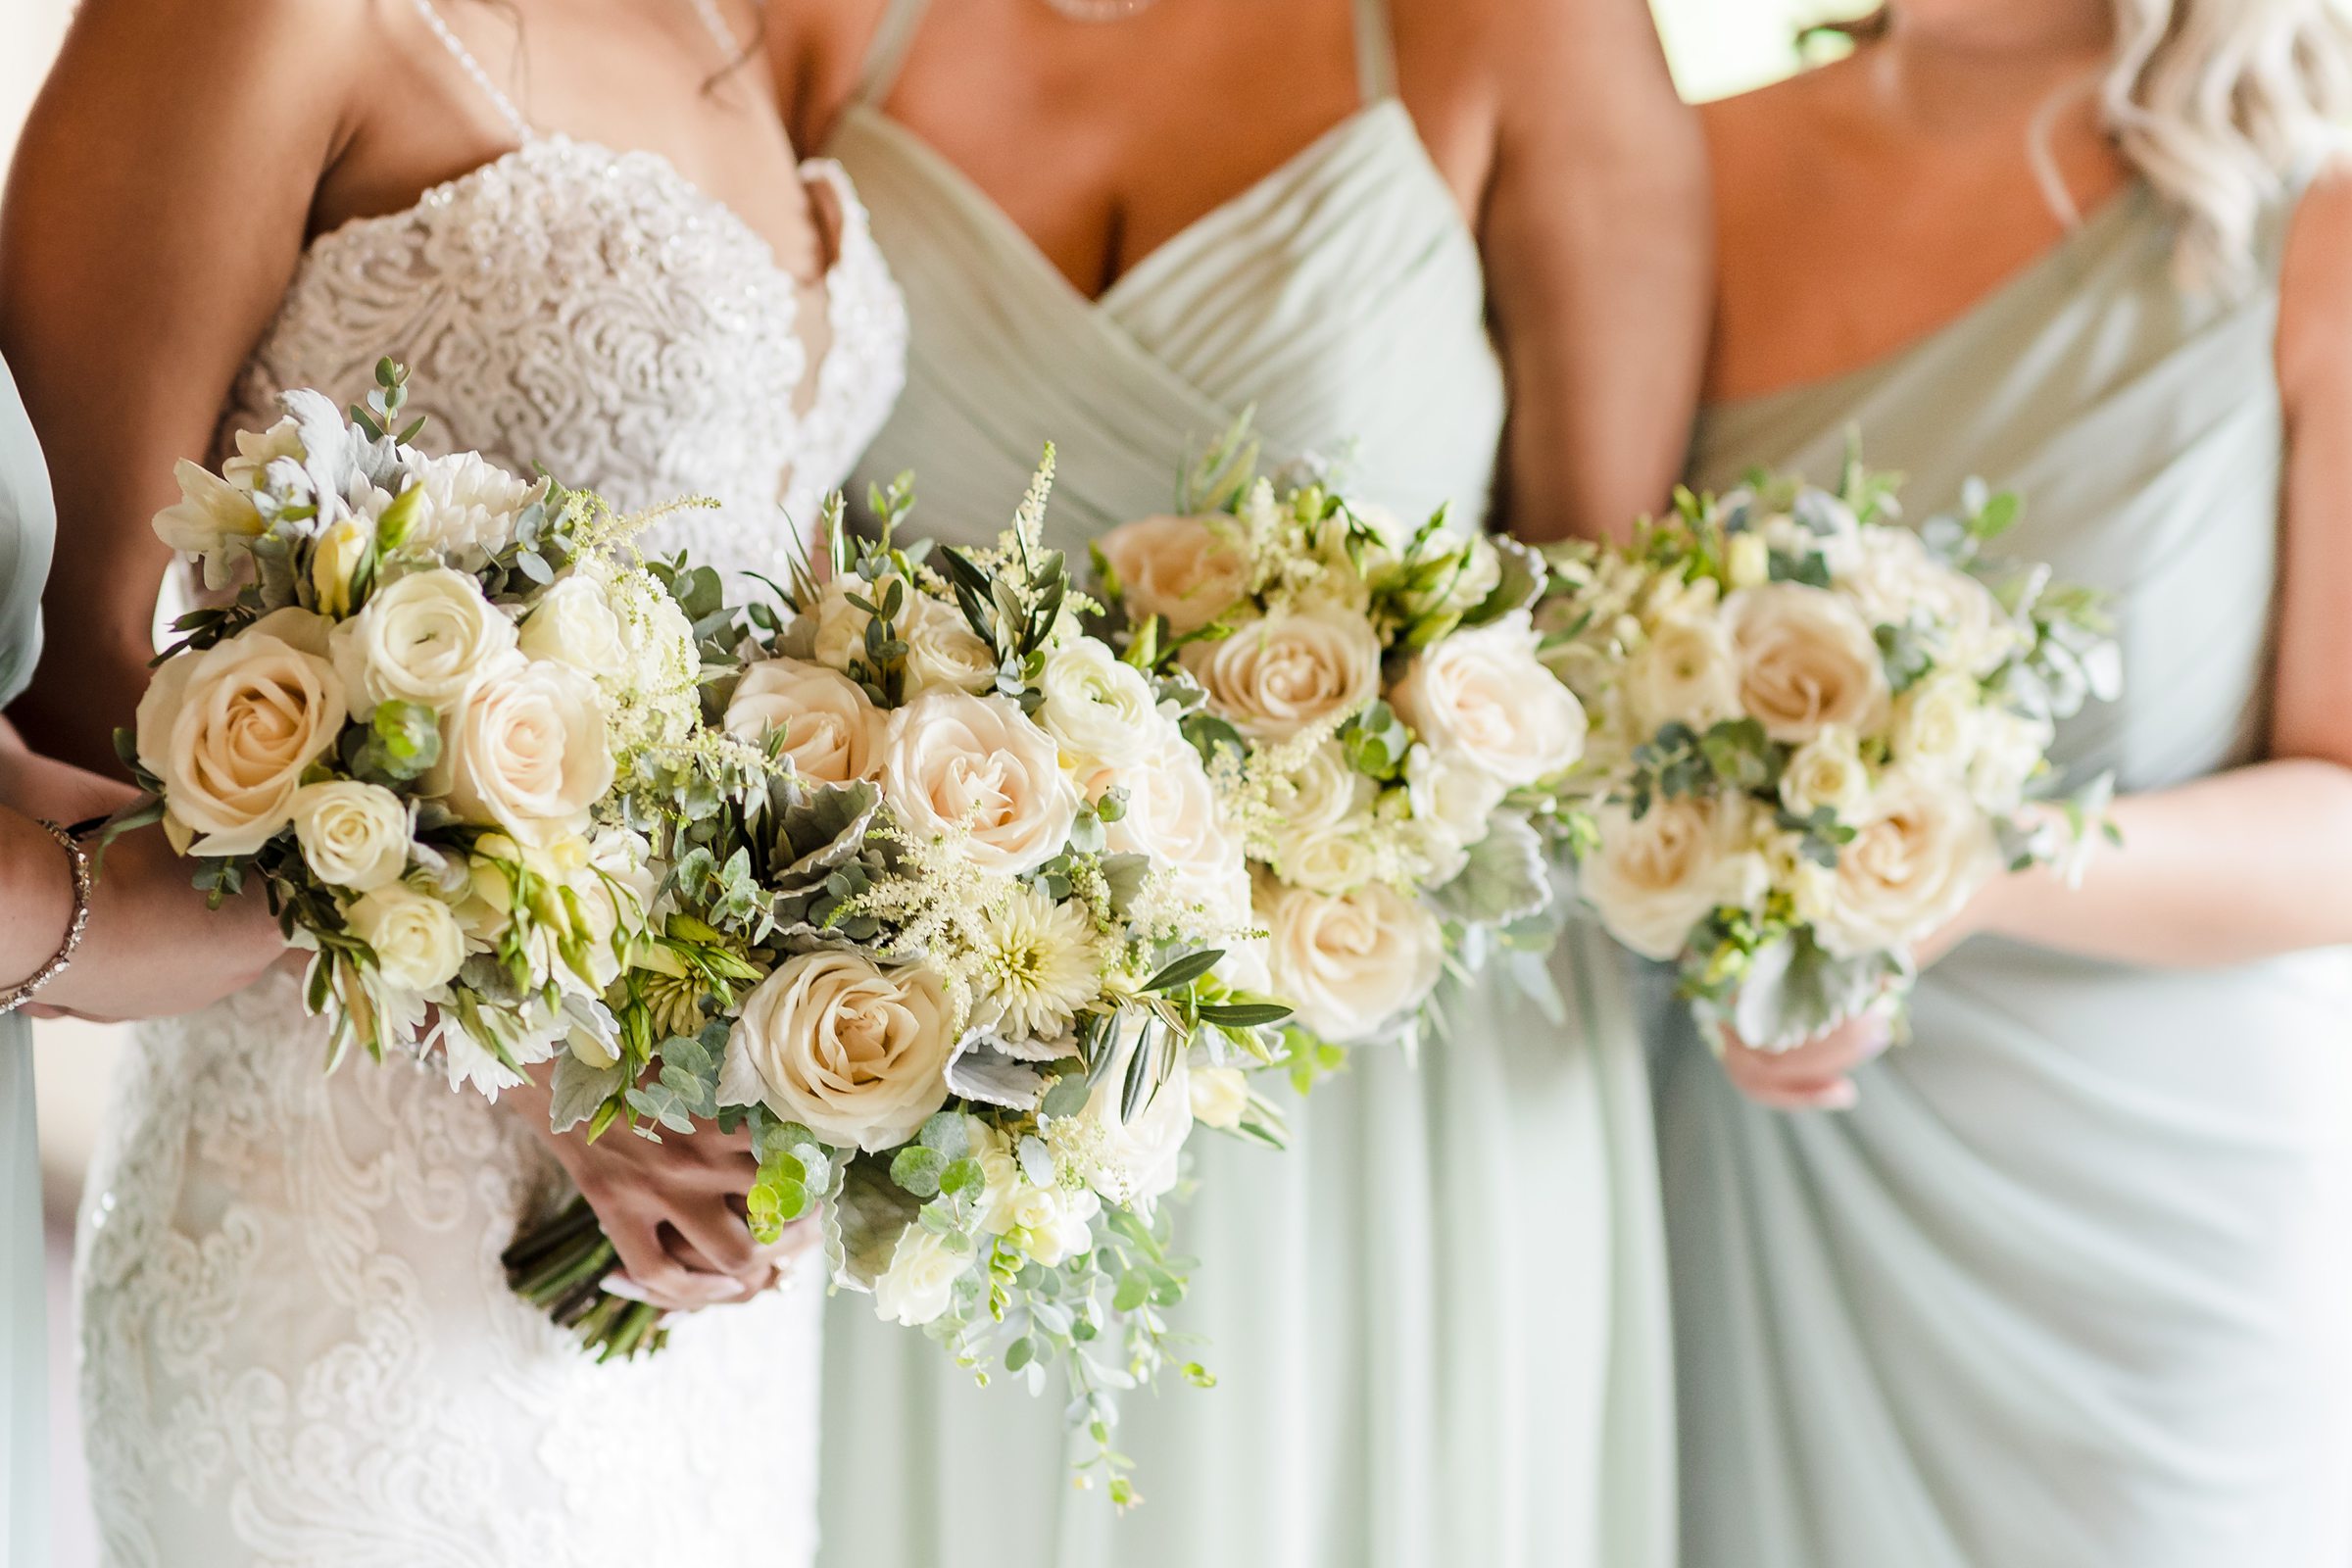 Bride and Bridesmaids florals during a wedding at the Fisherman's Inn in Elburn, Illinois.